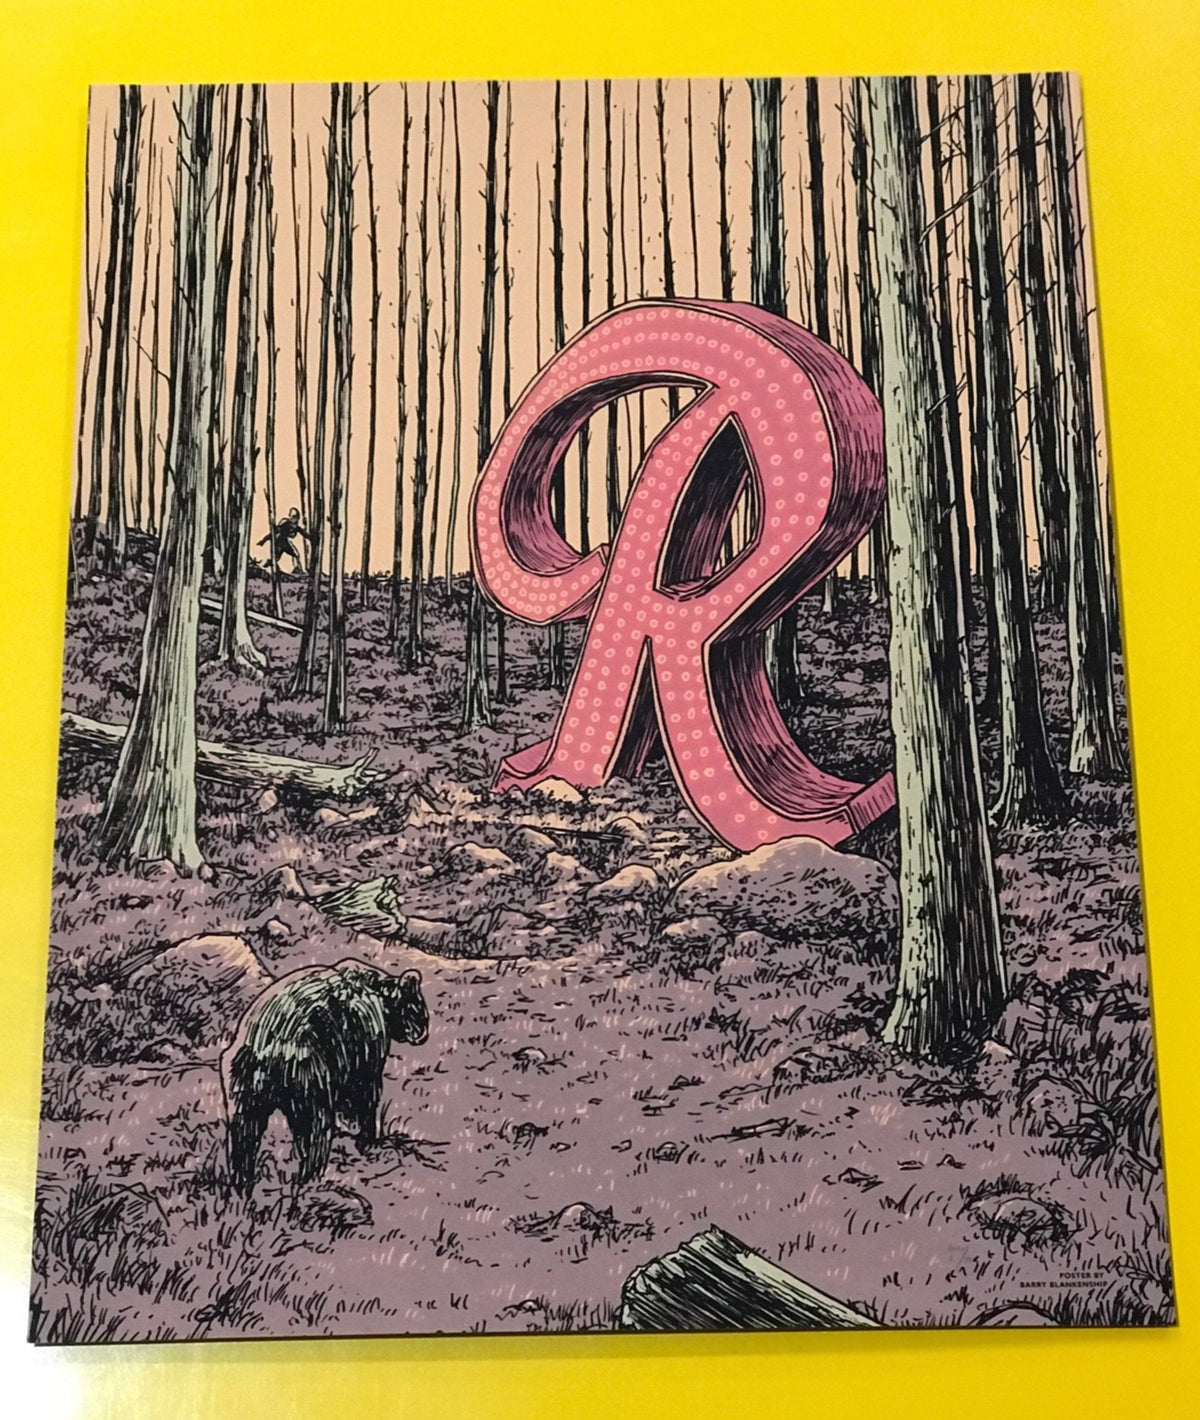 A large marquee lighted R is left in a barren forest. A bear happens upon it. Looks like it could be the end of times. 